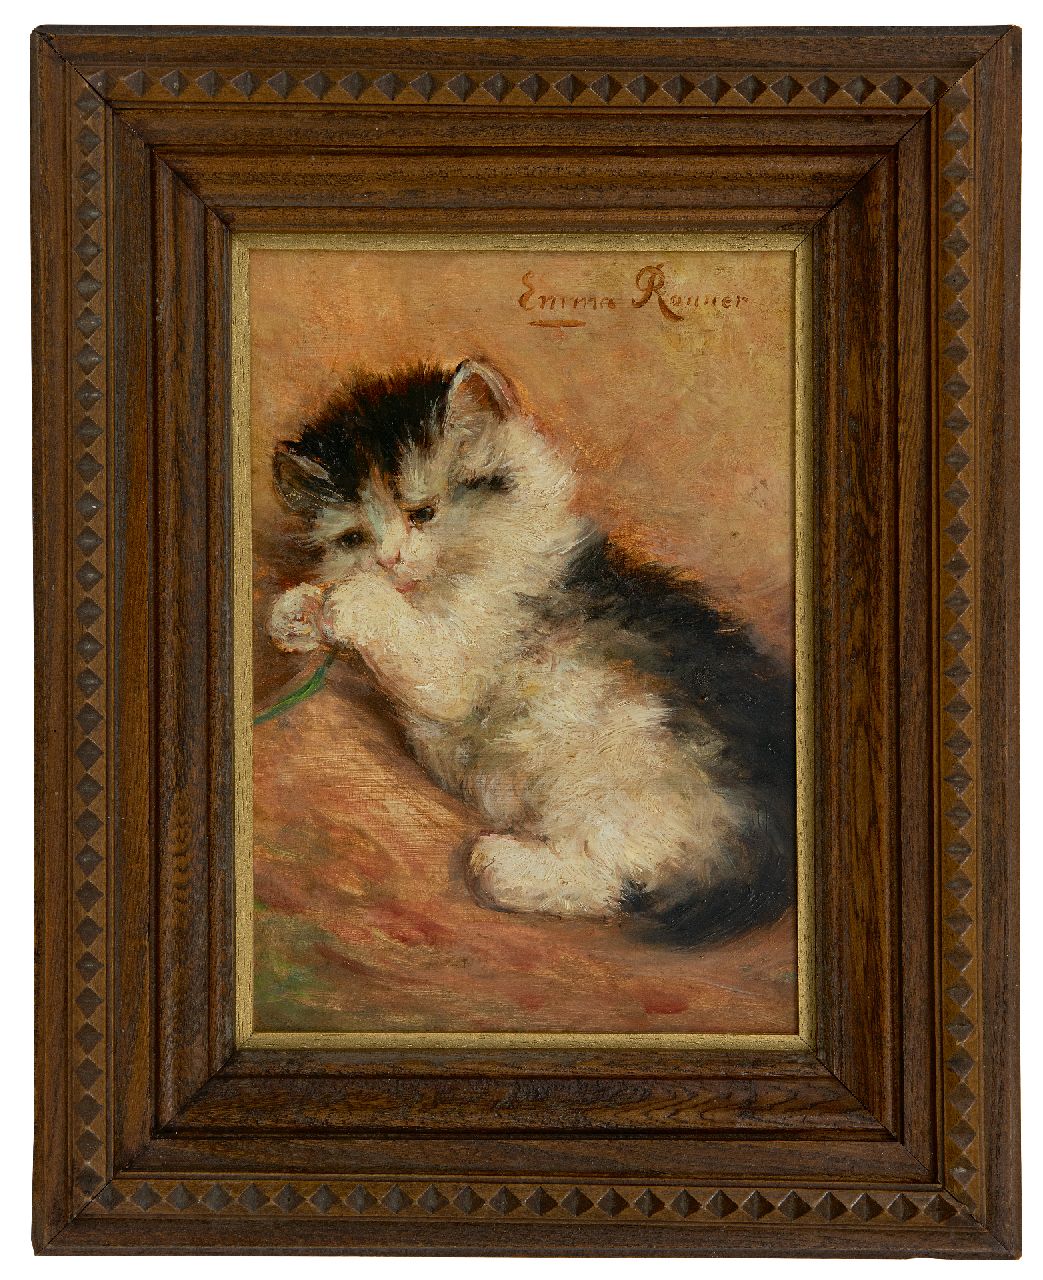 Ronner S.E.C.  | Stephanie 'Emma' Clotilde Ronner | Paintings offered for sale | Playful young kittten, oil on panel 23.4 x 16.5 cm, signed u.r.